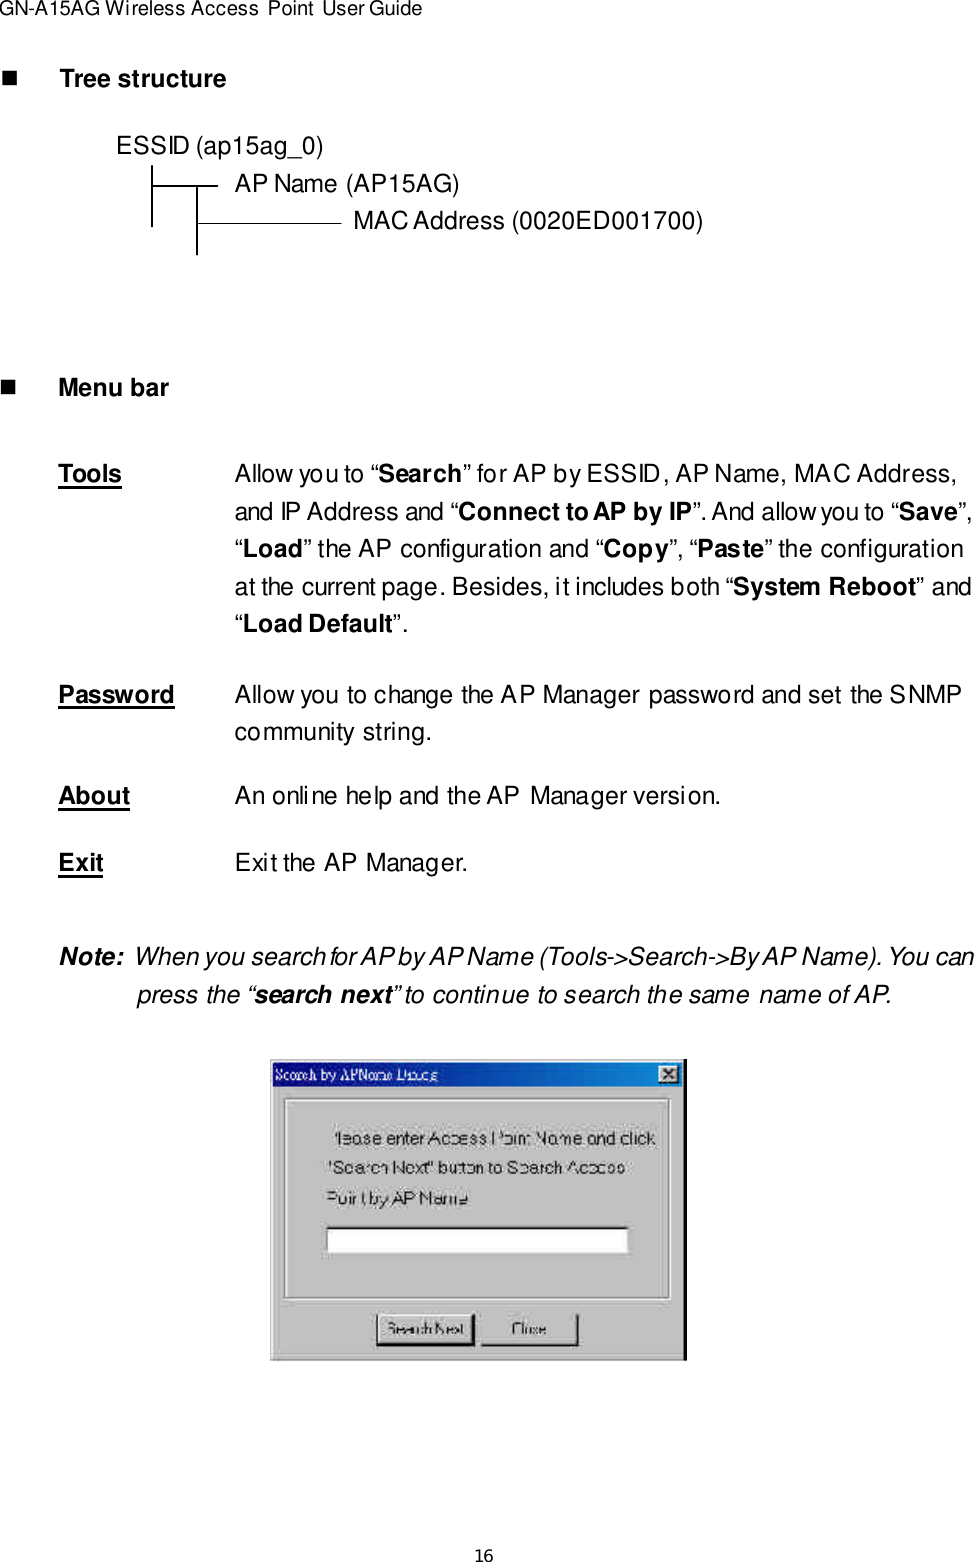 16GN-A15AG Wireless Access Point User GuidenTree structureESSID (ap15ag_0)AP Name (AP15AG)MAC Address (0020ED001700)nMenu barToolsAllow you to “Search” for AP by ESSID, AP Name, MAC Address,and IP Address and “Connect to AP by IP”. And allow you to “Save”,“Load” the AP configuration and “Copy”, “Paste” the configurationat the current page. Besides, it includes both “System Reboot” and“Load Default”.PasswordAllow you to change the AP Manager password and set the SNMPcommunity string.AboutAn online help and the AP Manager version.ExitExit the AP Manager.Note:  When you search for AP by AP Name (Tools-&gt;Search-&gt;By AP Name). You can   press the “search next” to continue to search the same name of AP.